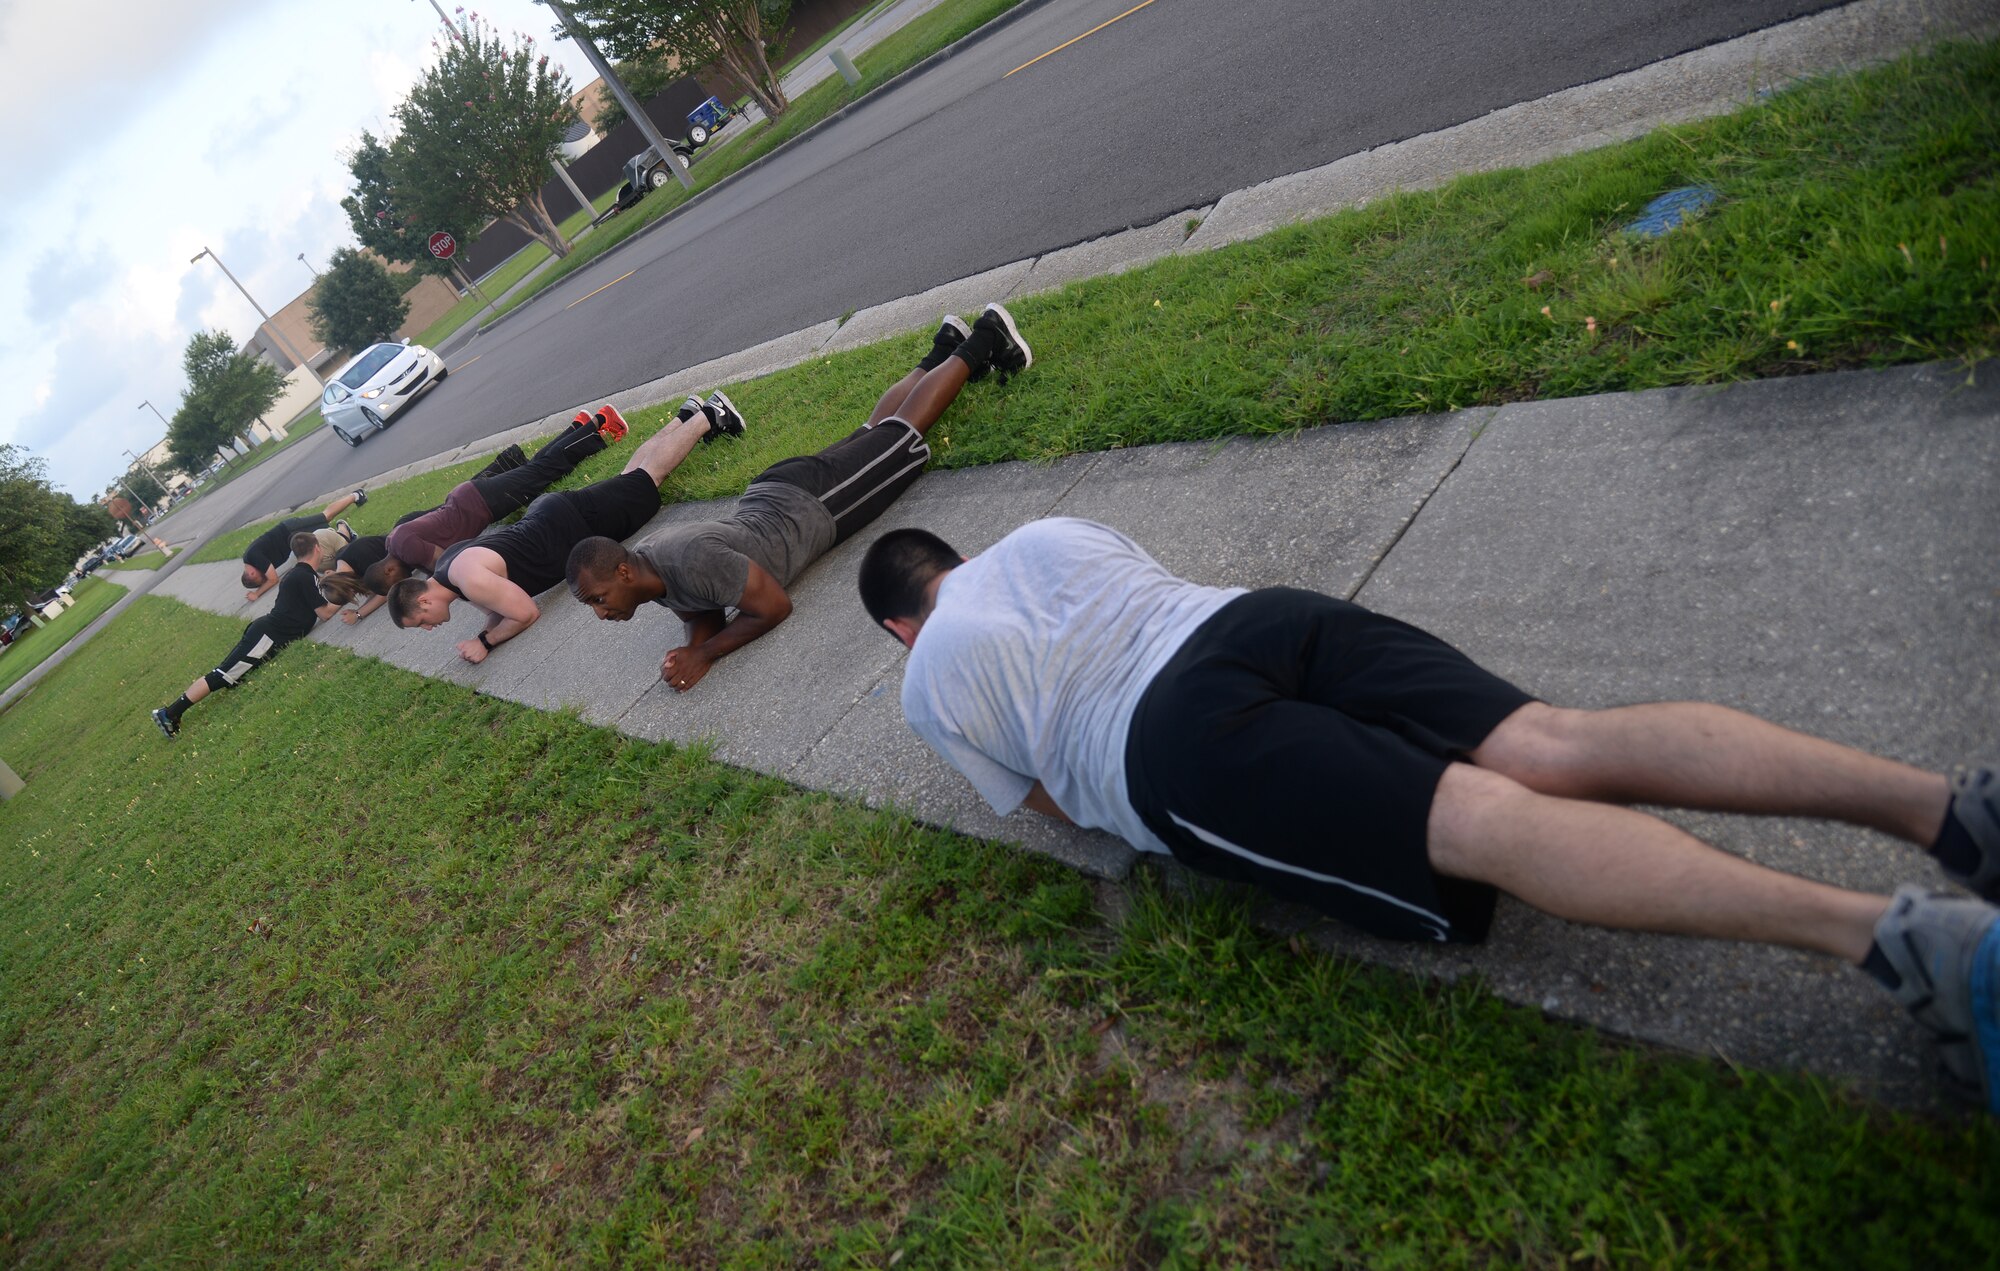 Members of the 81st Comptroller Squadron perform planks after running sprints at squadron physical training, June 16, 2015, Keesler Air Force Base, Miss. The 81st CPTS conducts PT three times a week to  build physical strength and foster squadron unity. (U.S. Air Force photo by Senior Airman Holly Mansfield)